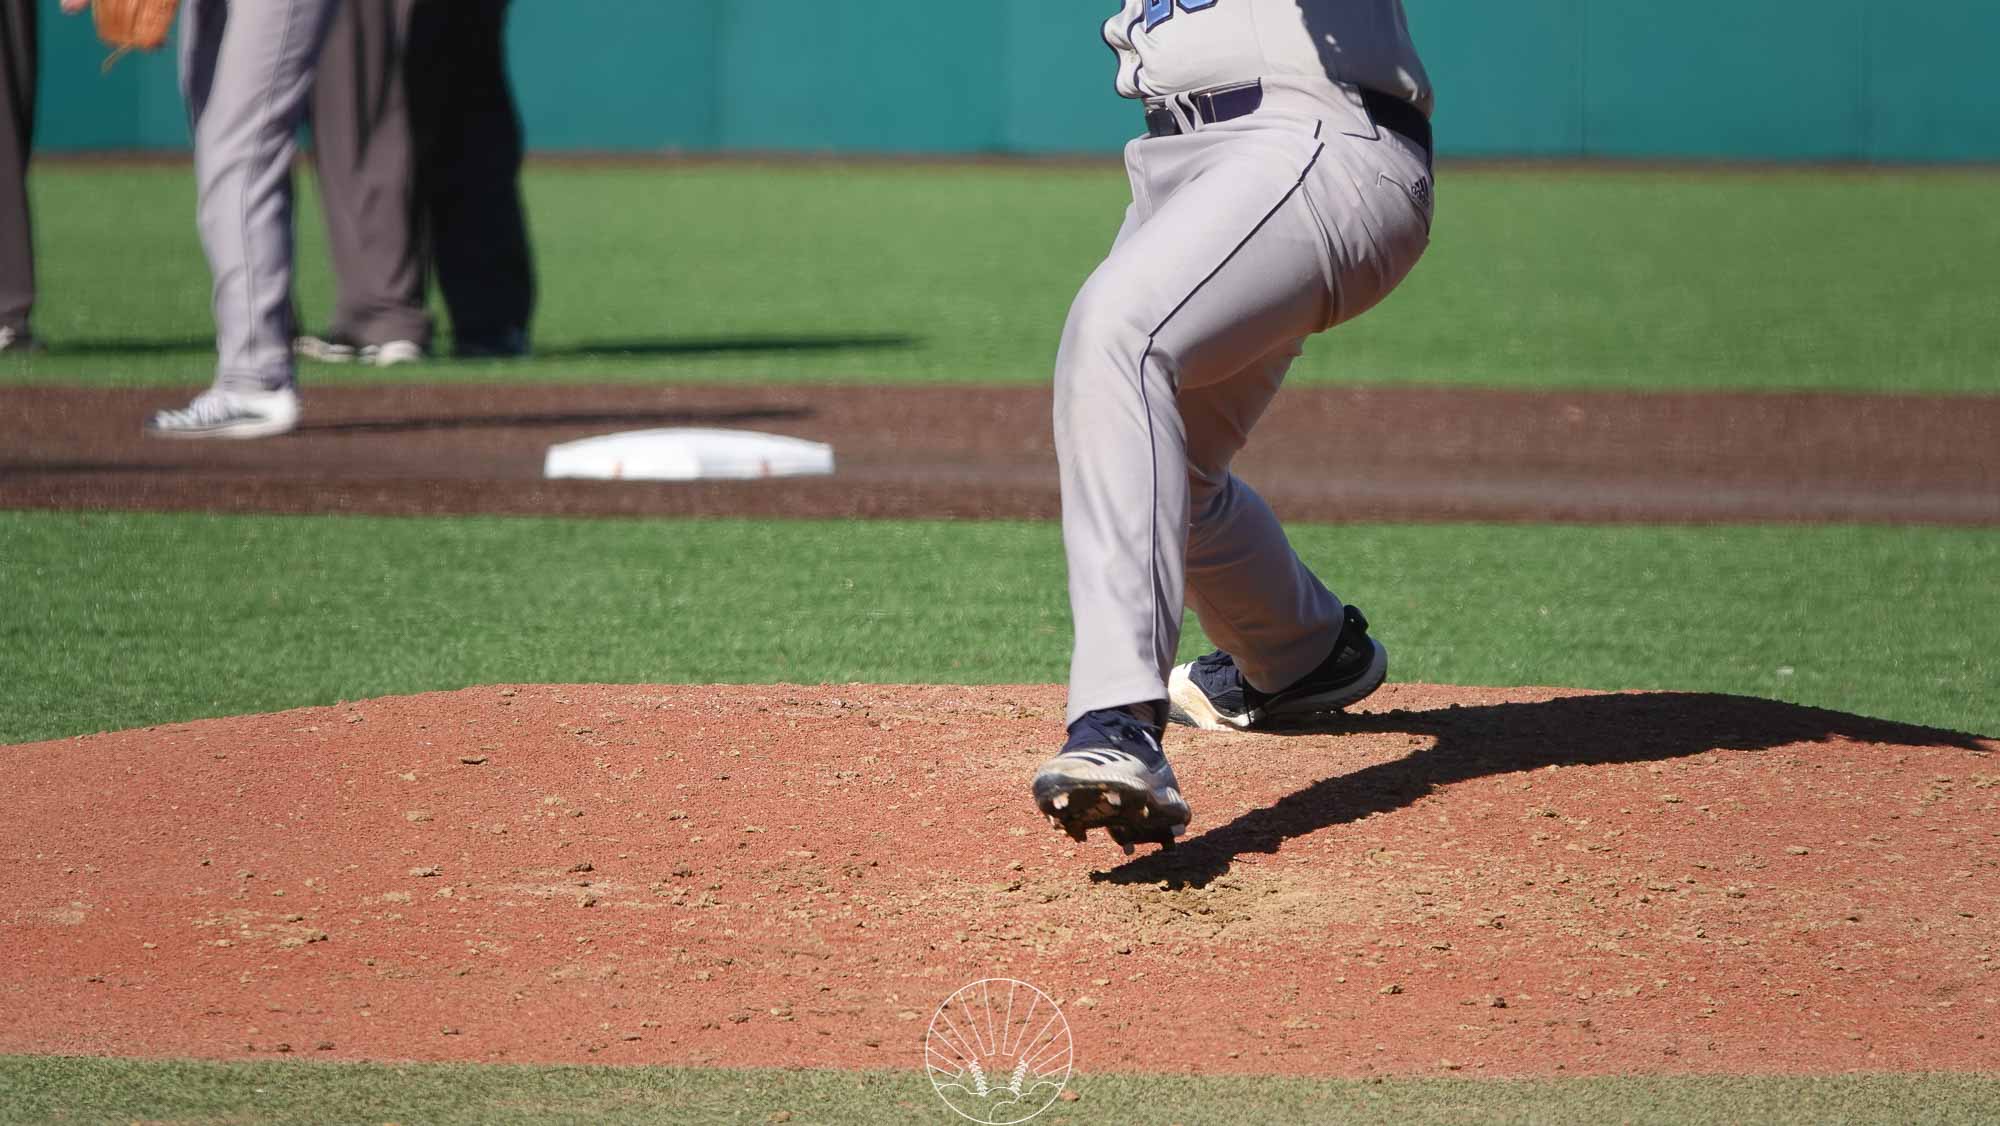 The Pitching Mechanics Article You'll Actually Understand